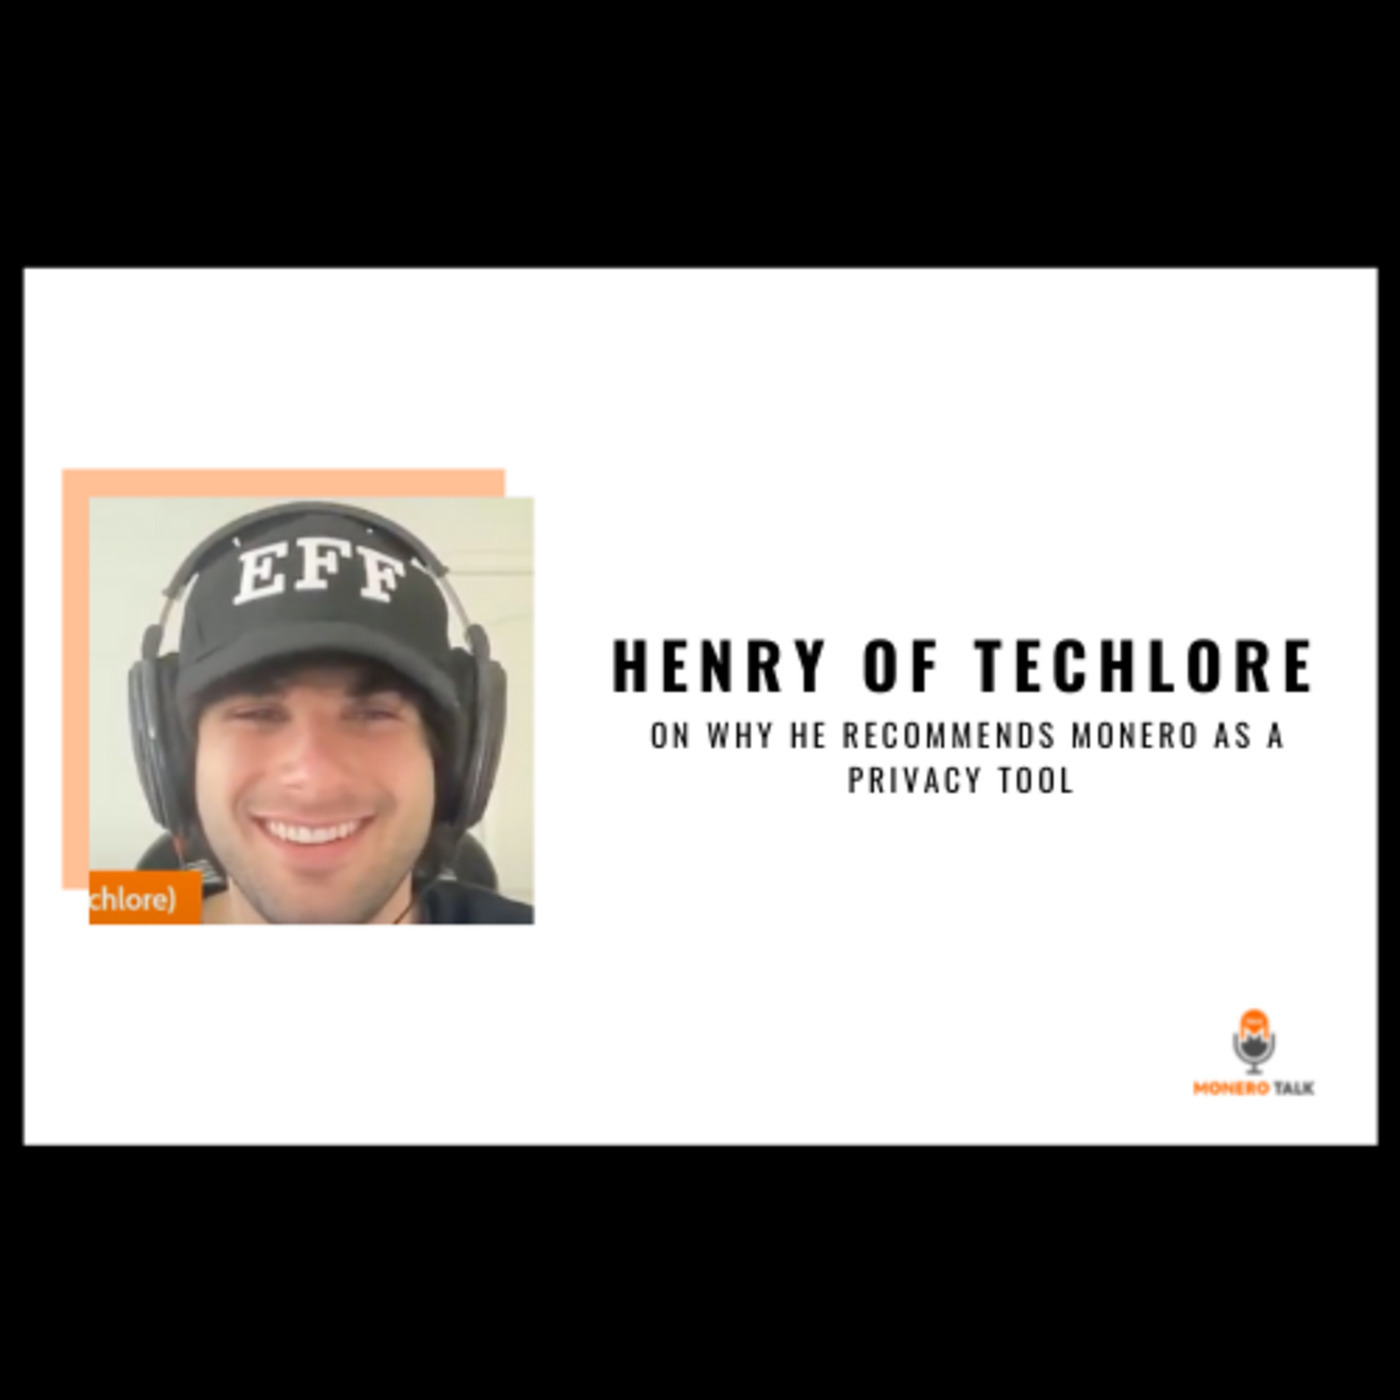 Monero Talk techlore-on-why-he-recommends-monero-as-a-privacy-tool: Henry of Techlore on why he recommends Monero as a Privacy Tool